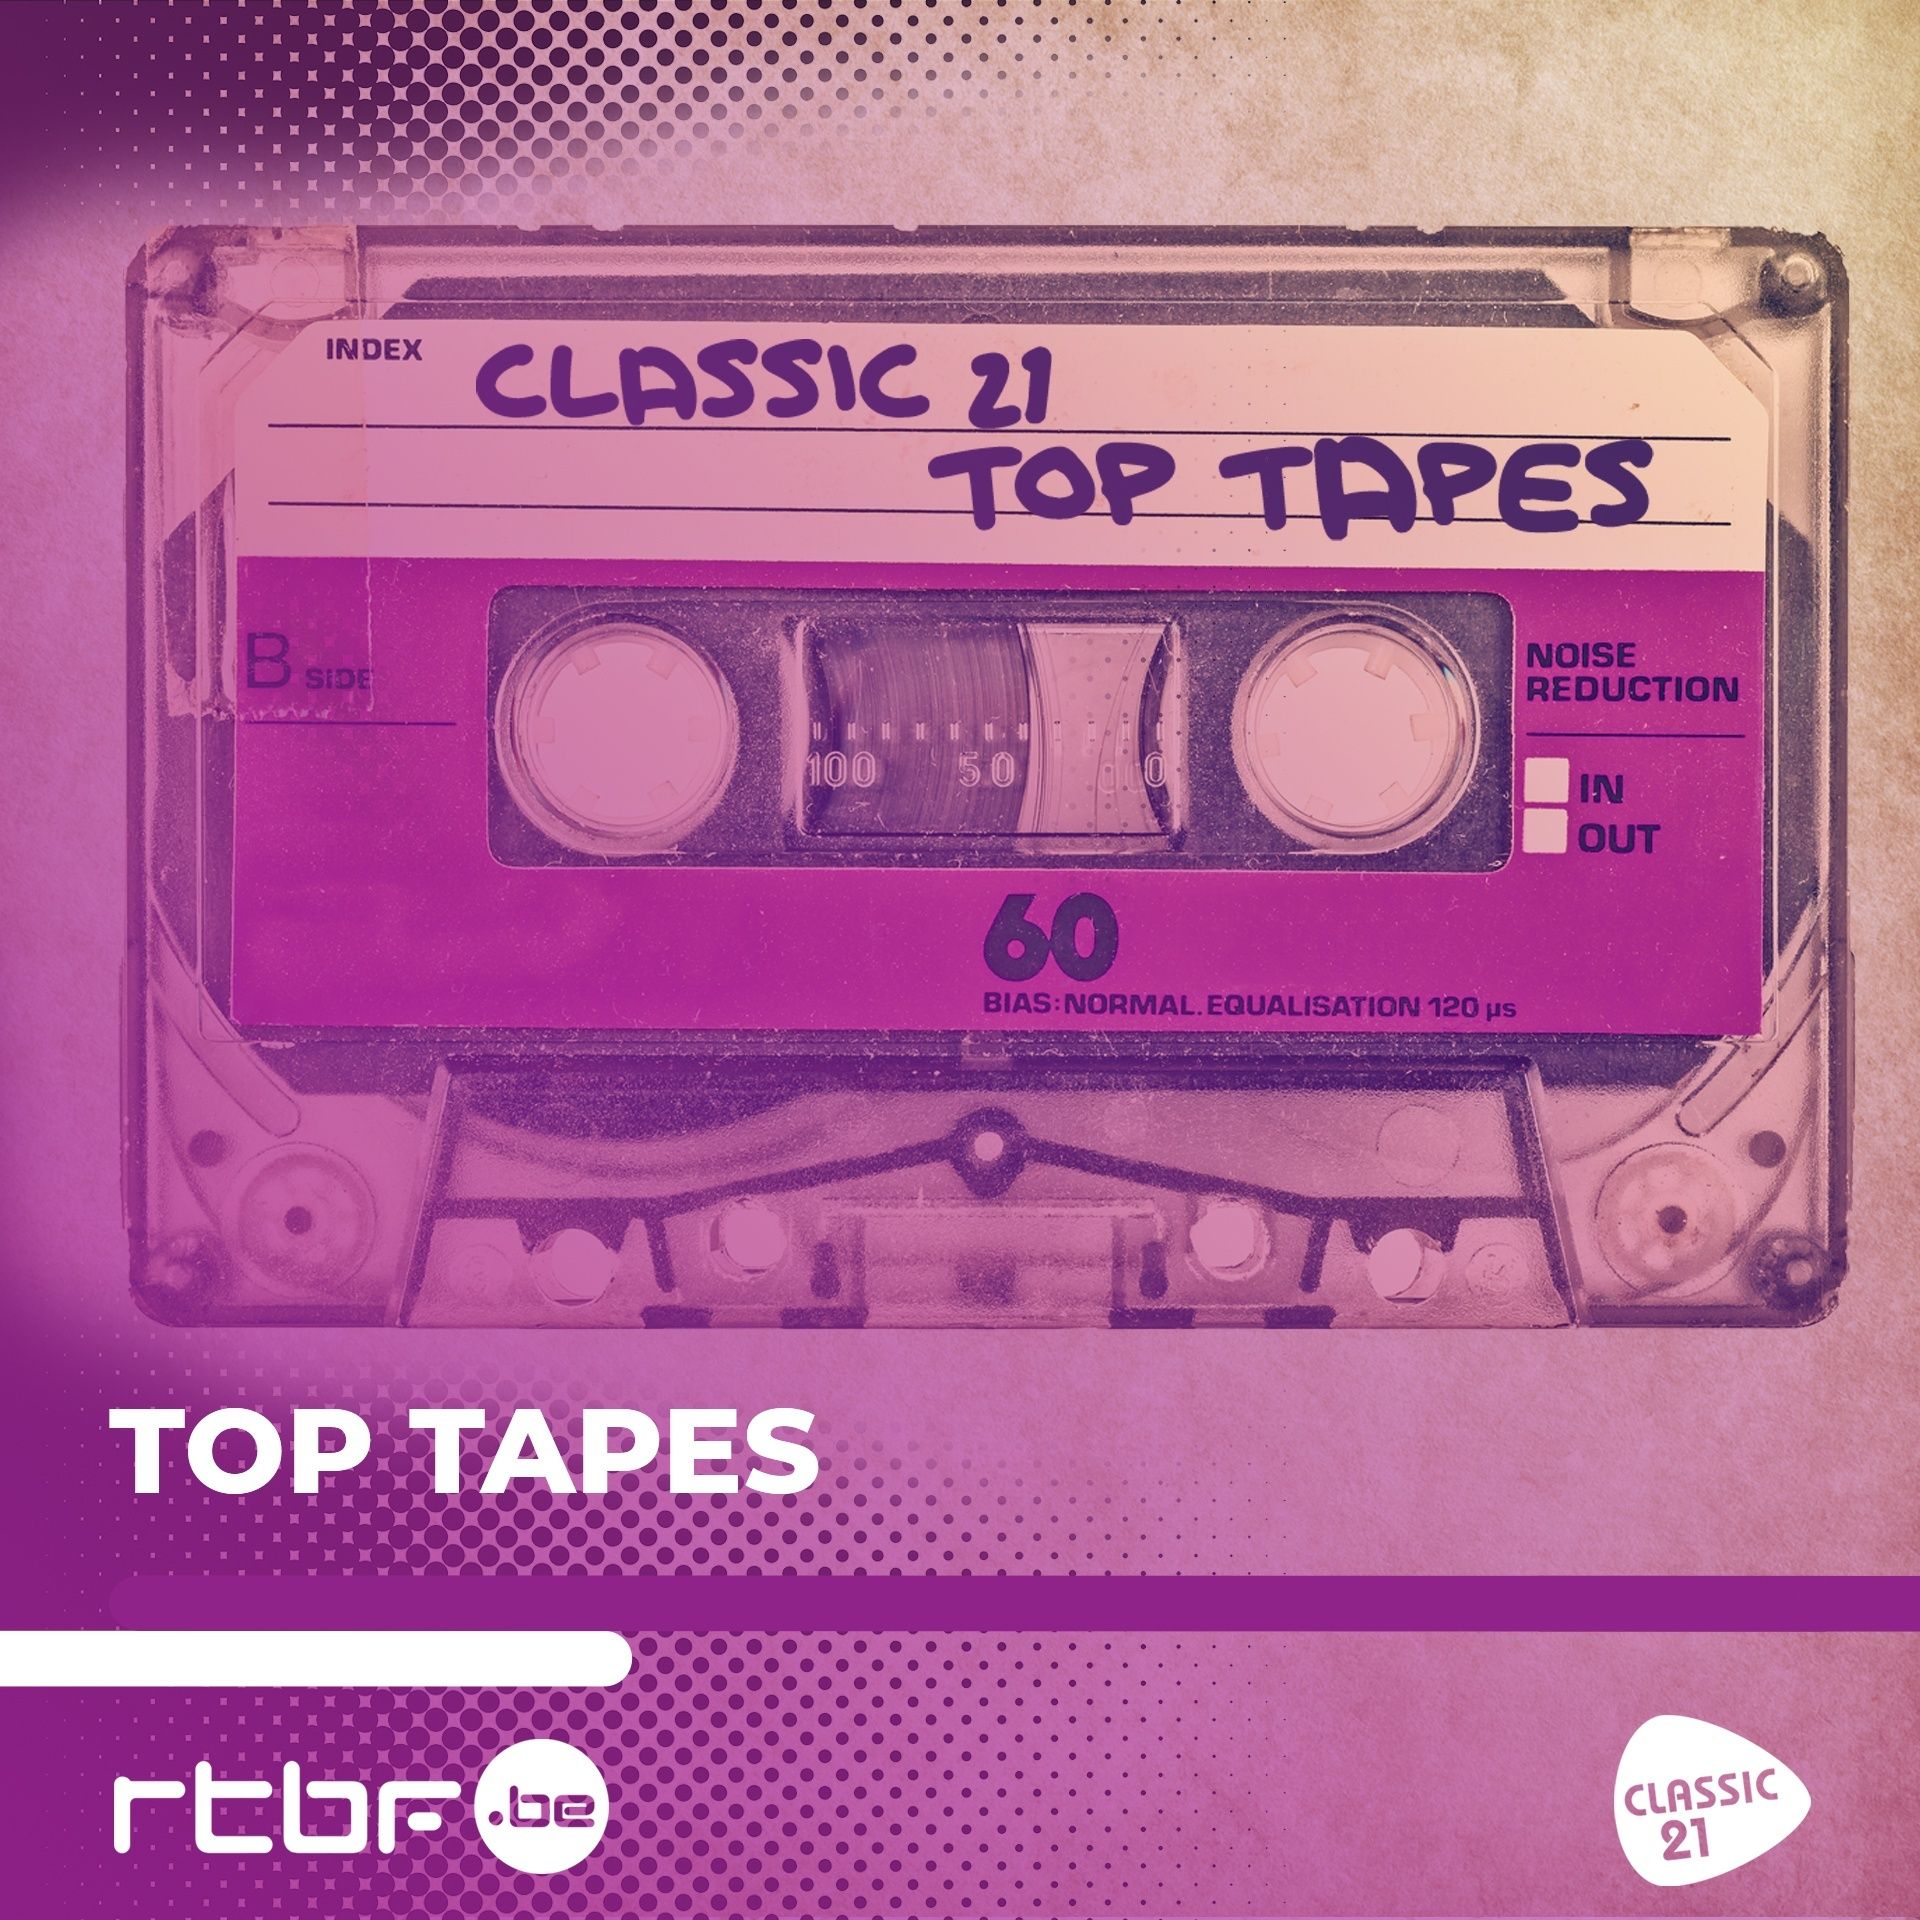 Top Tapes